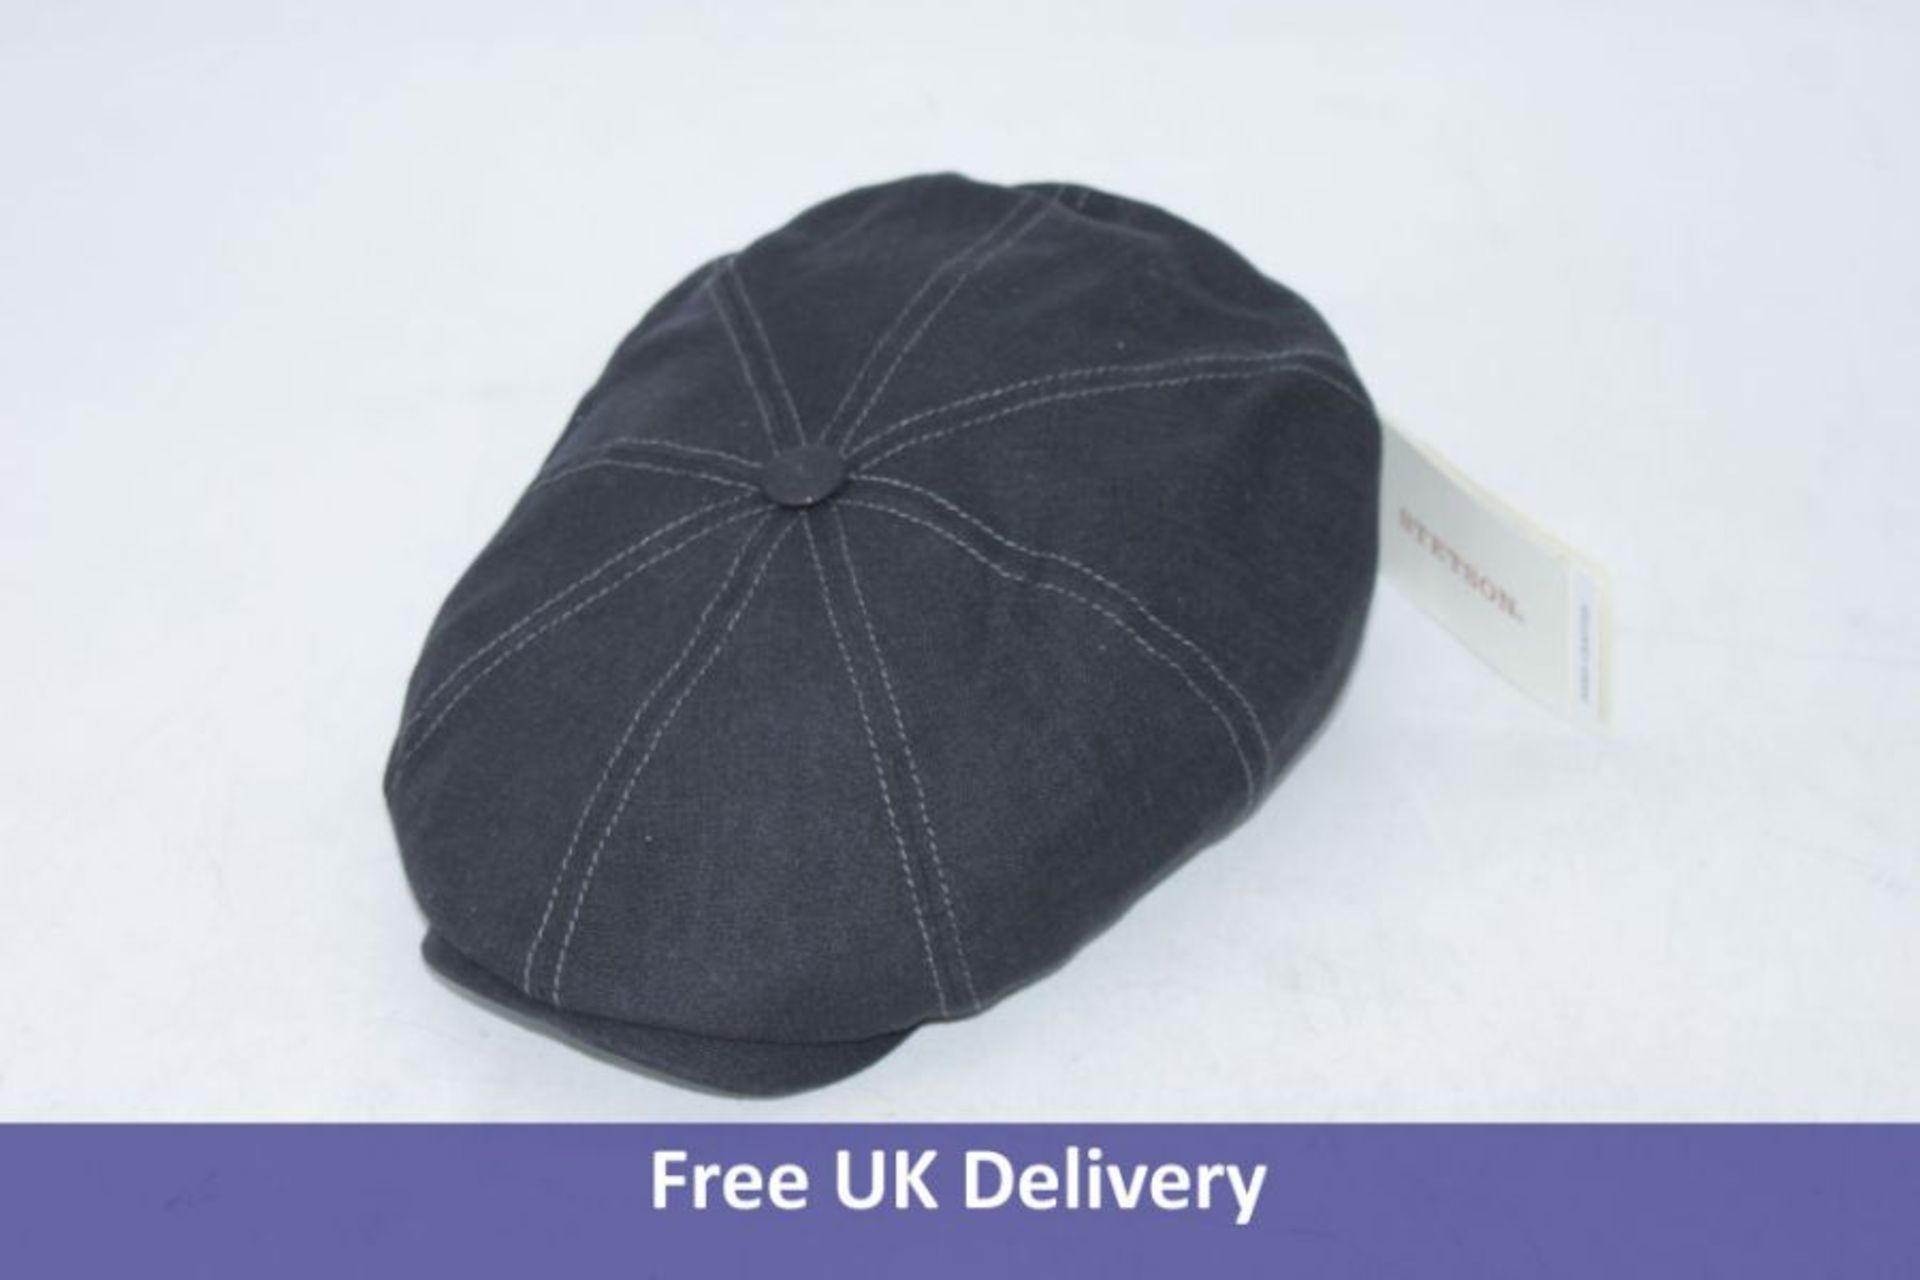 Two Stetson Hatteras Linen Flat Caps, Black, Size 55/S - Image 2 of 2